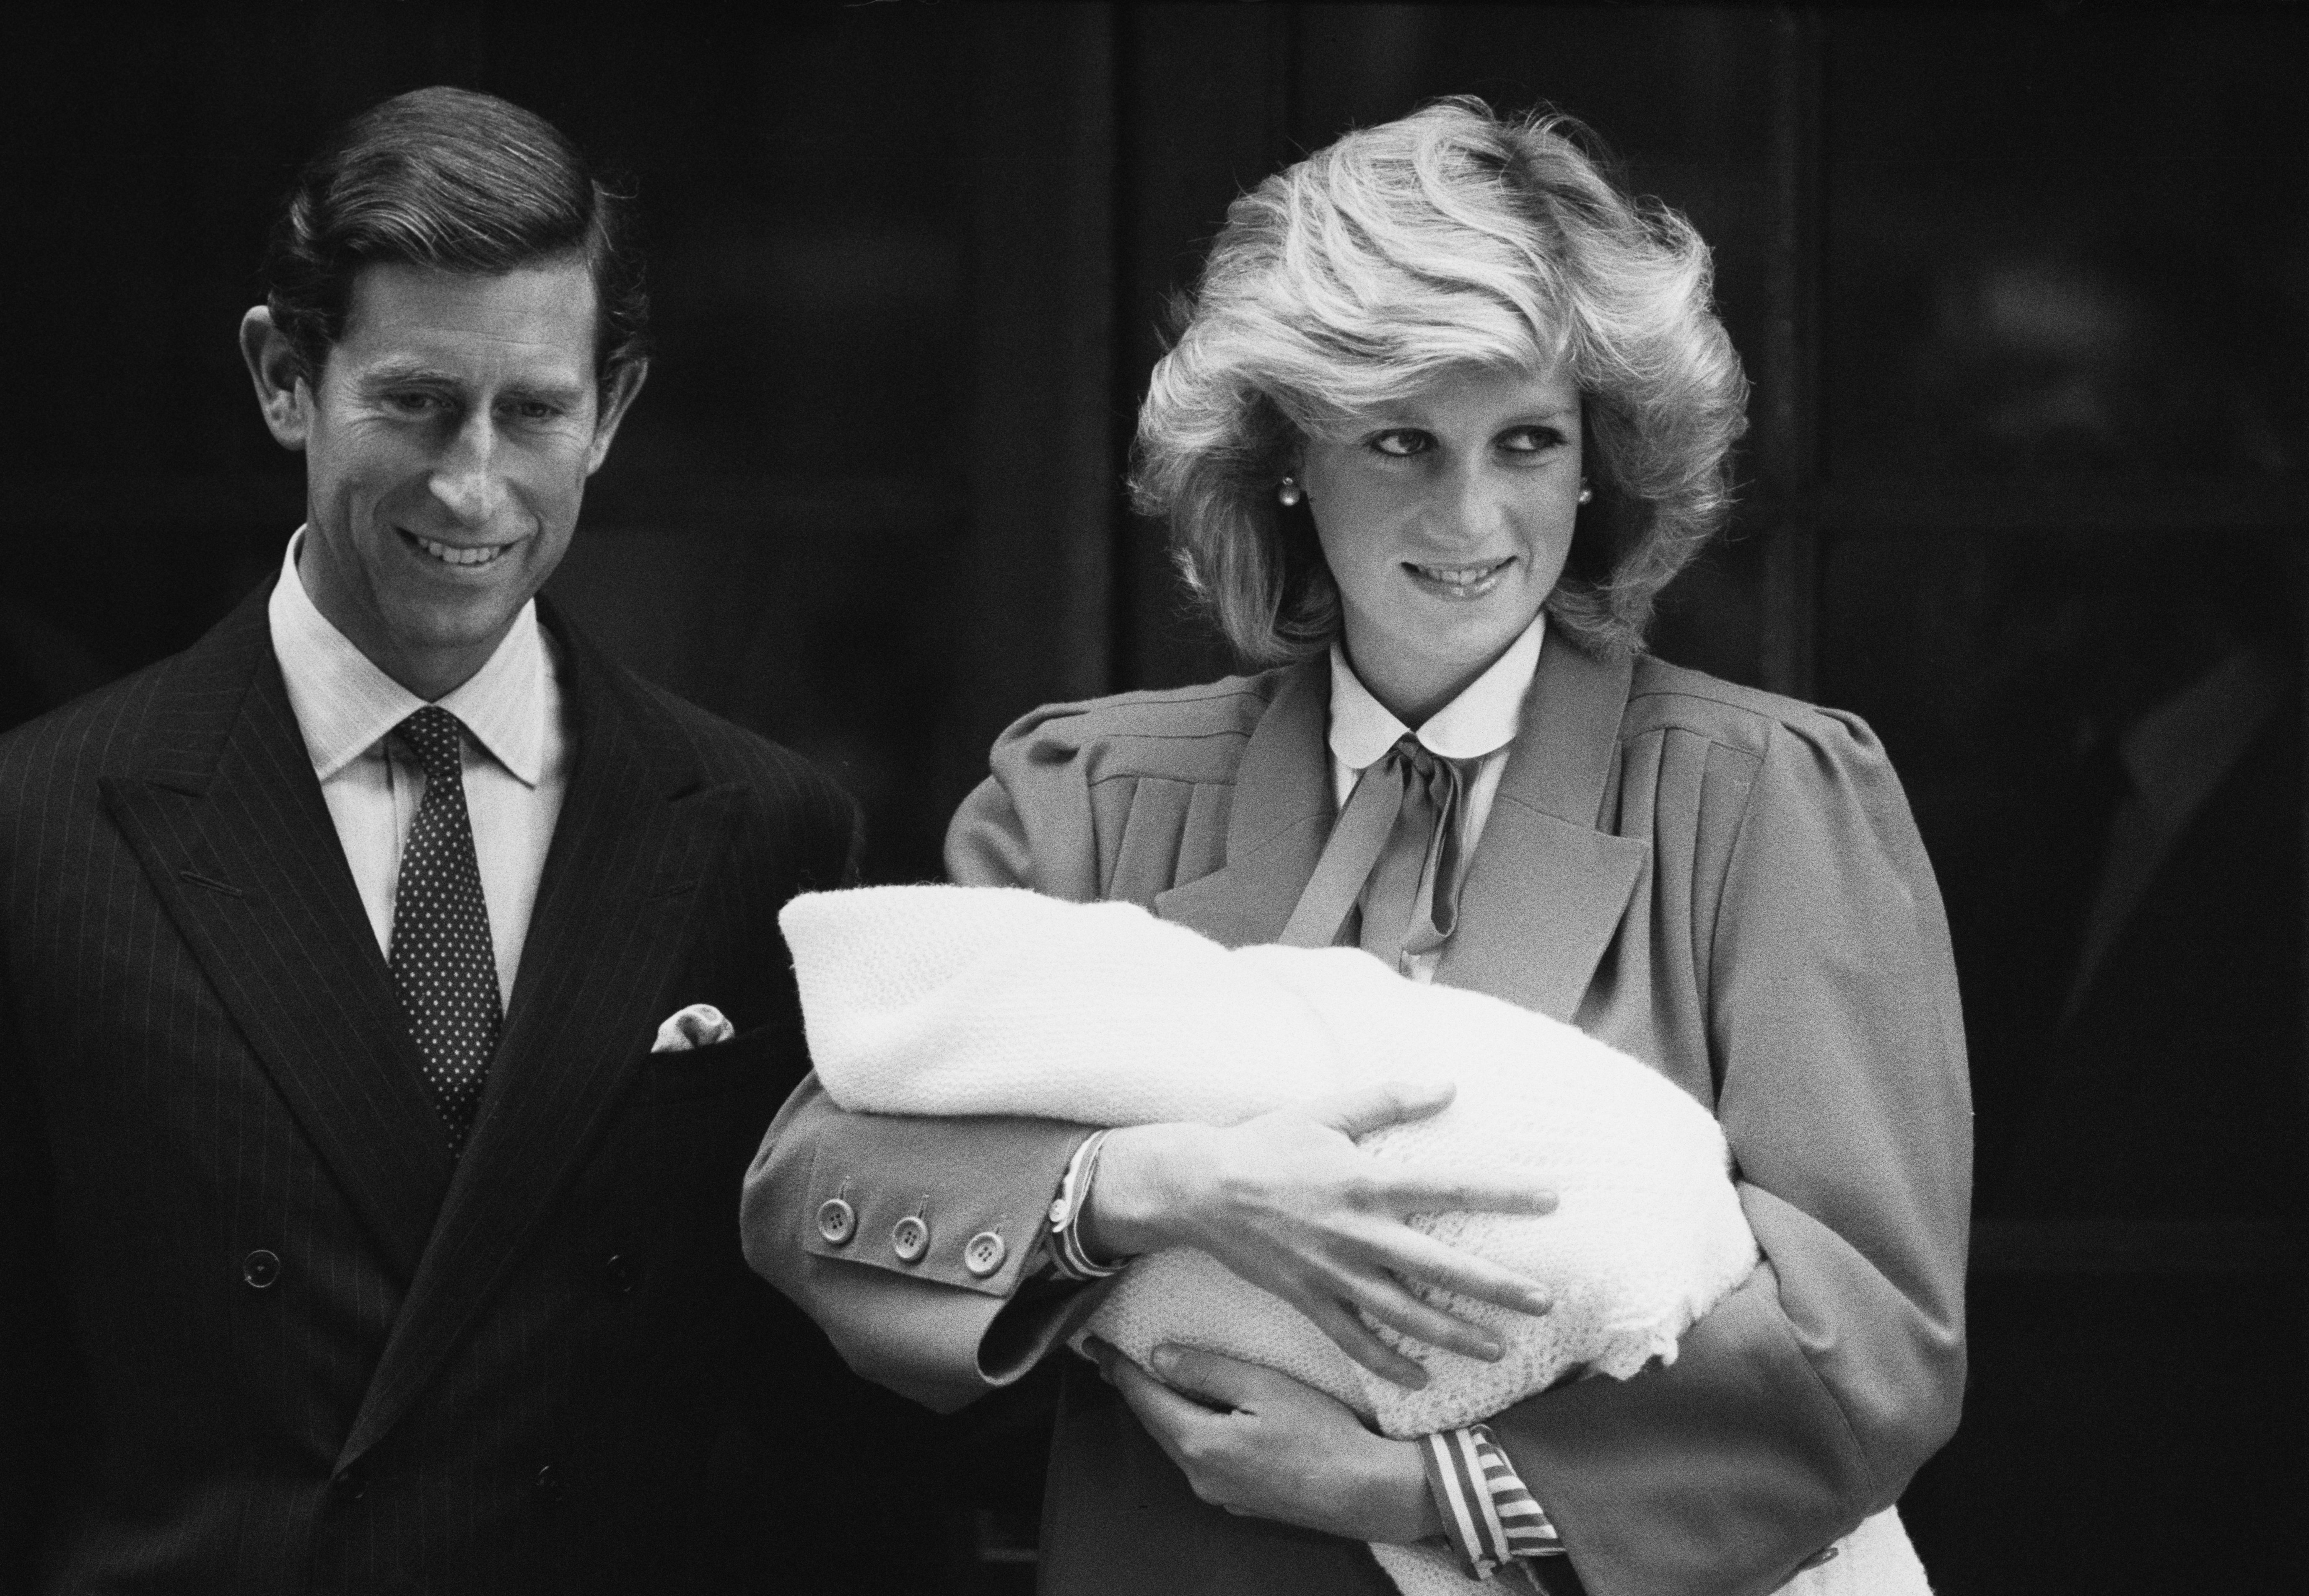 Prince Charles and Princess Diana, with their newborn son Prince Harry, at St Mary's Hospital in Paddington, London, on September 16, 1984 | Source: Getty Images